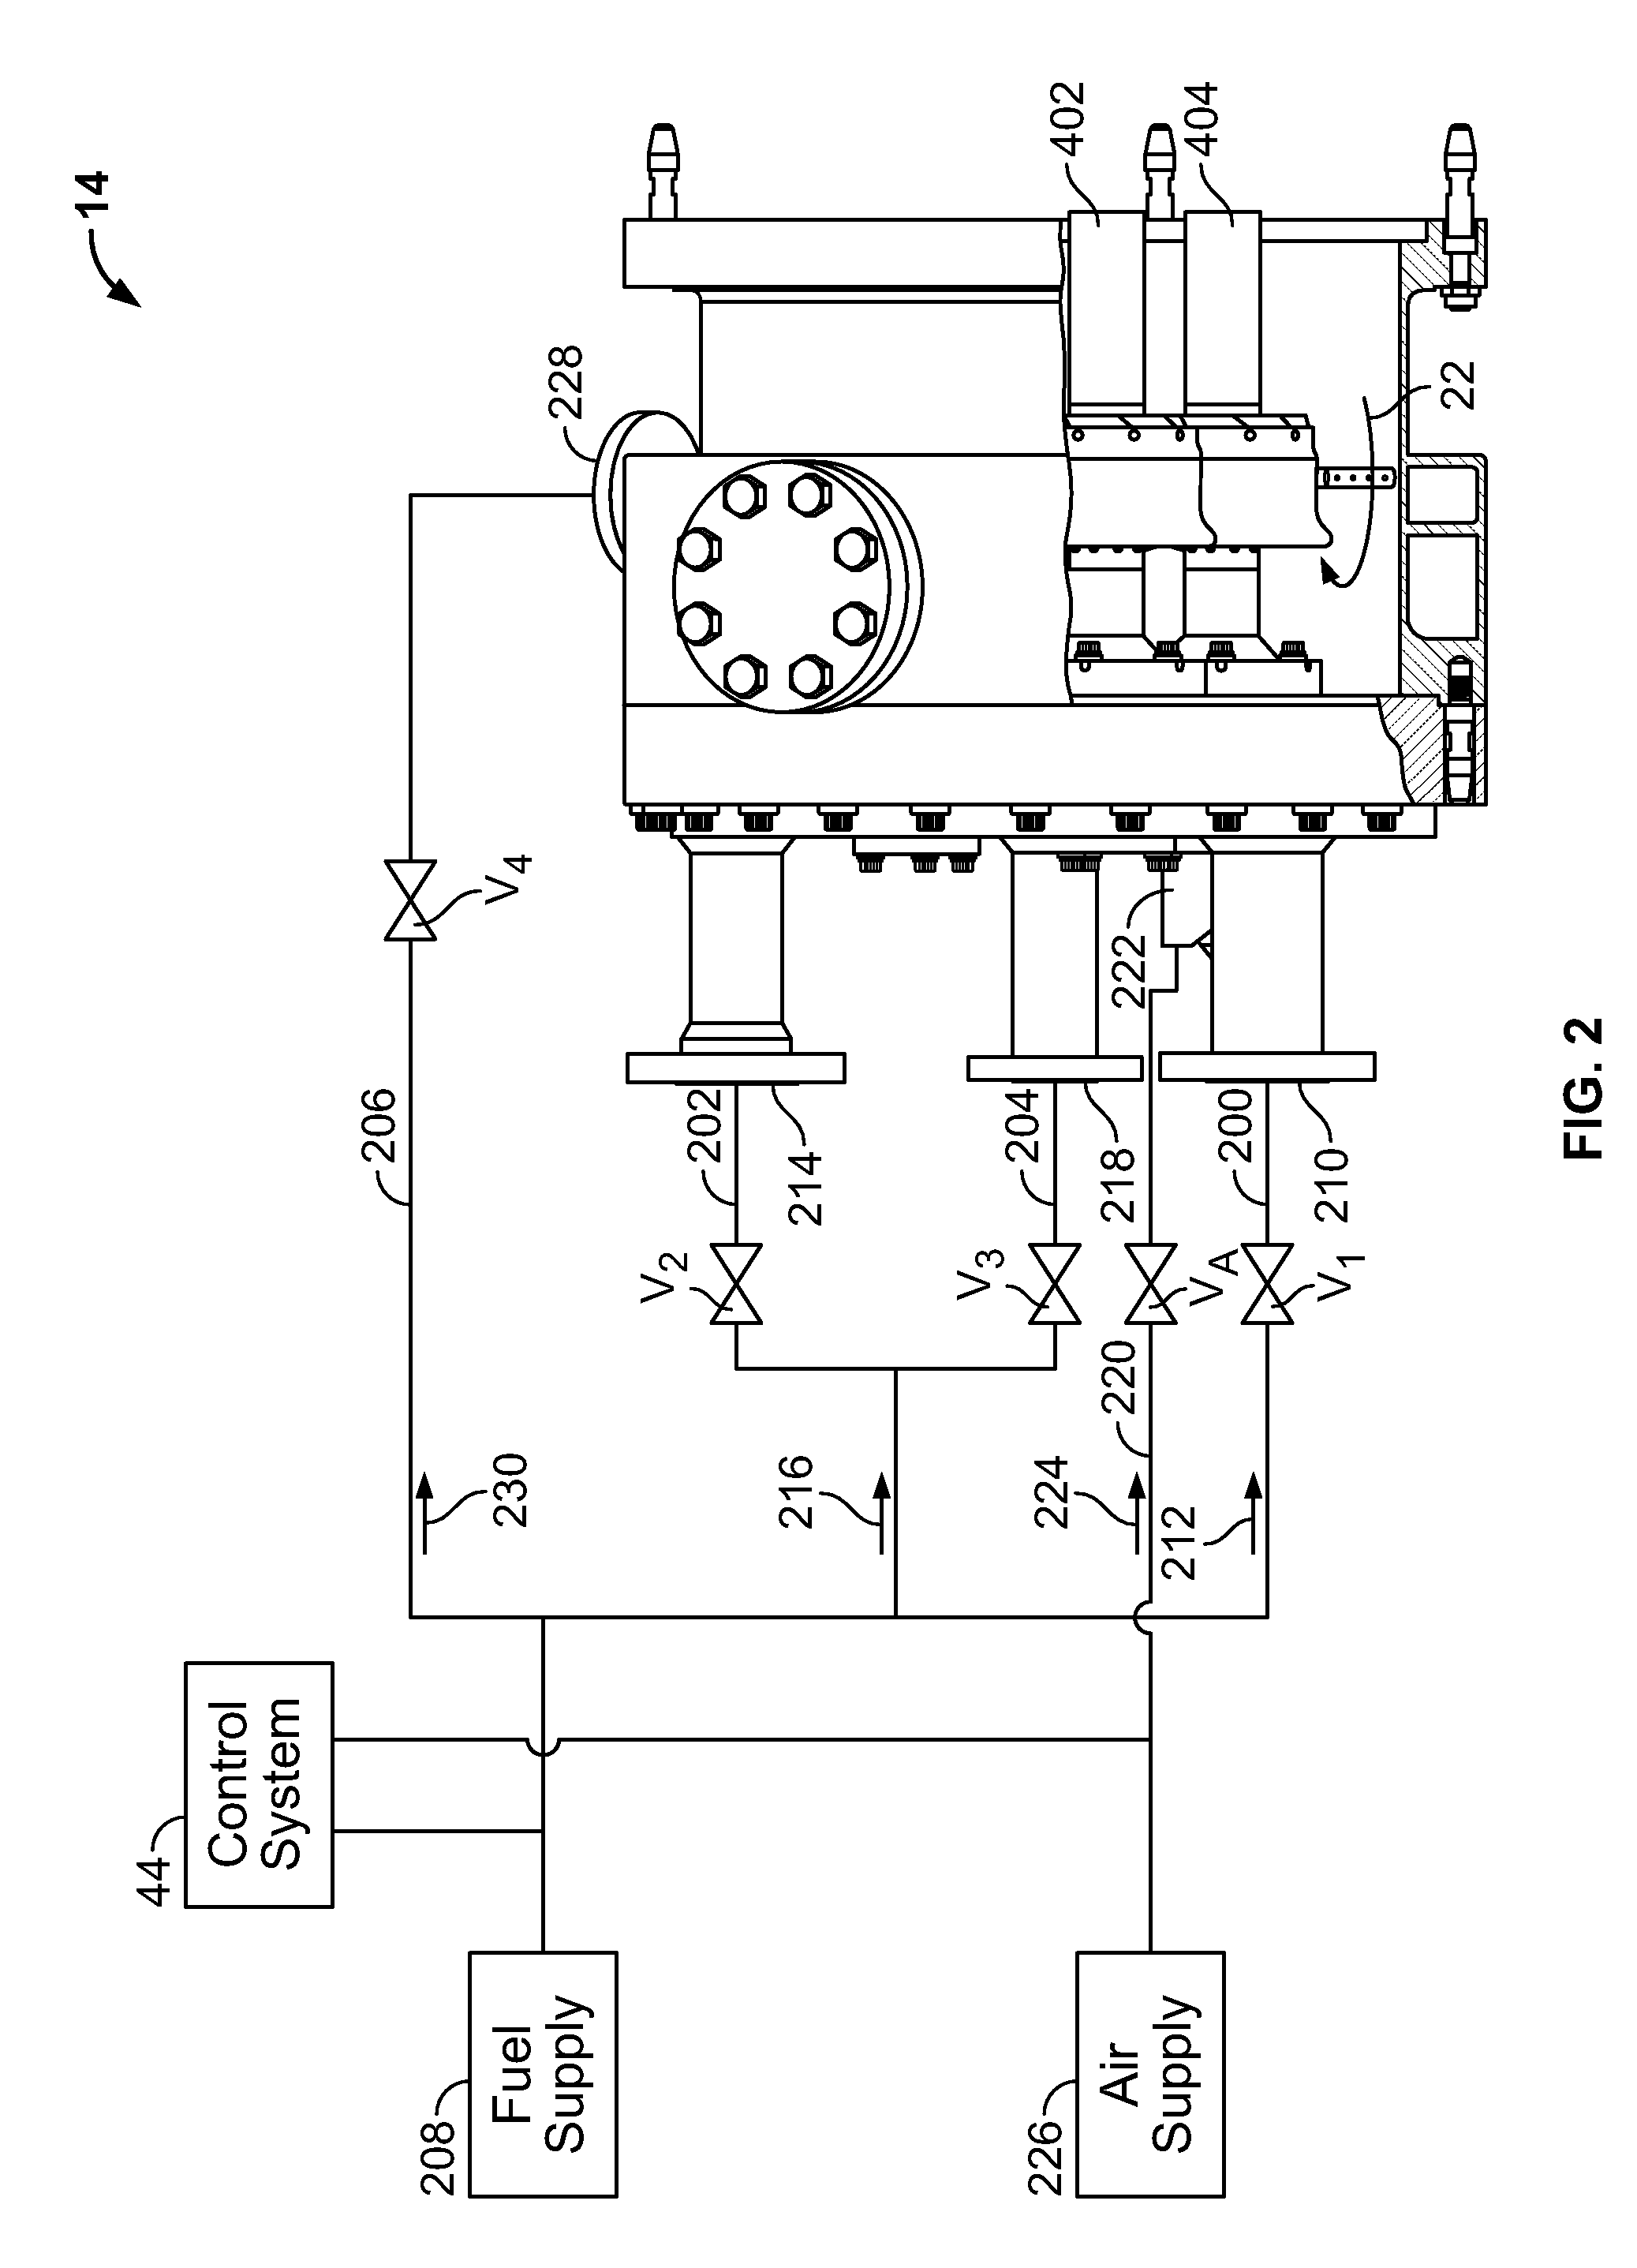 Method and apparatus for combusting fuel within a gas turbine engine